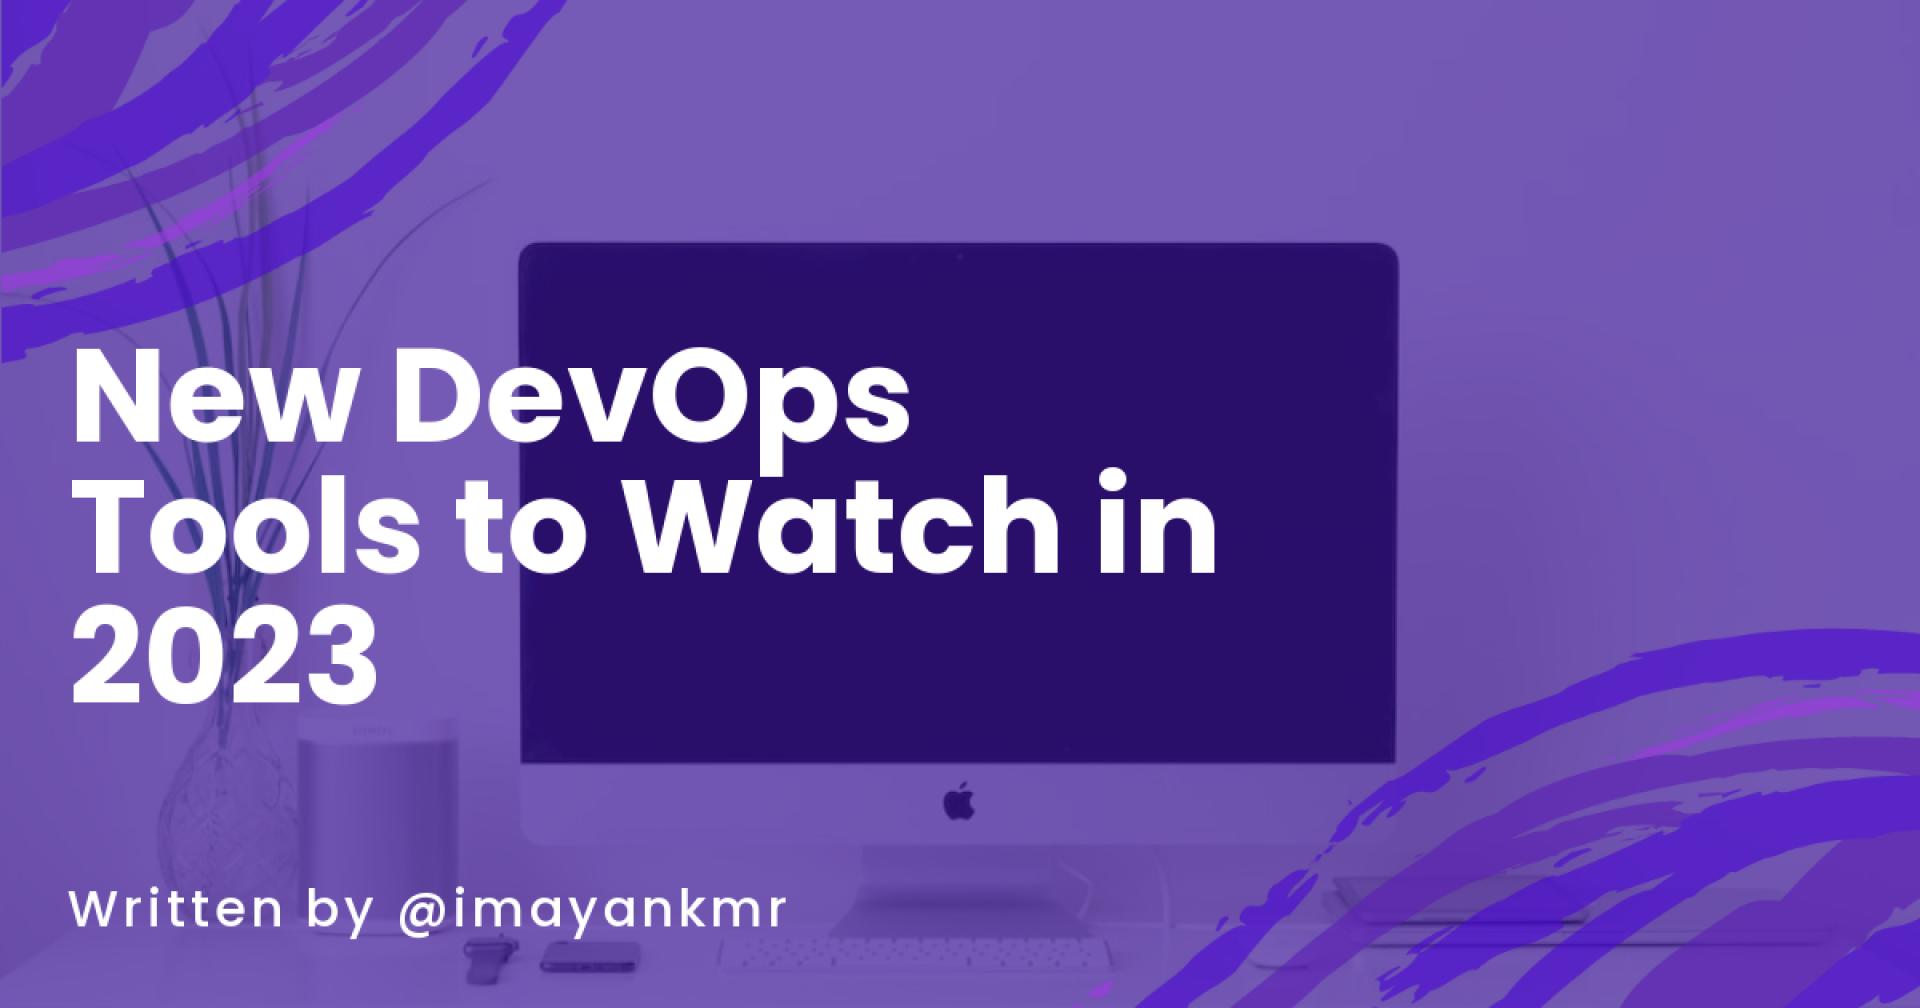 New DevOps Tools to Watch in 2023